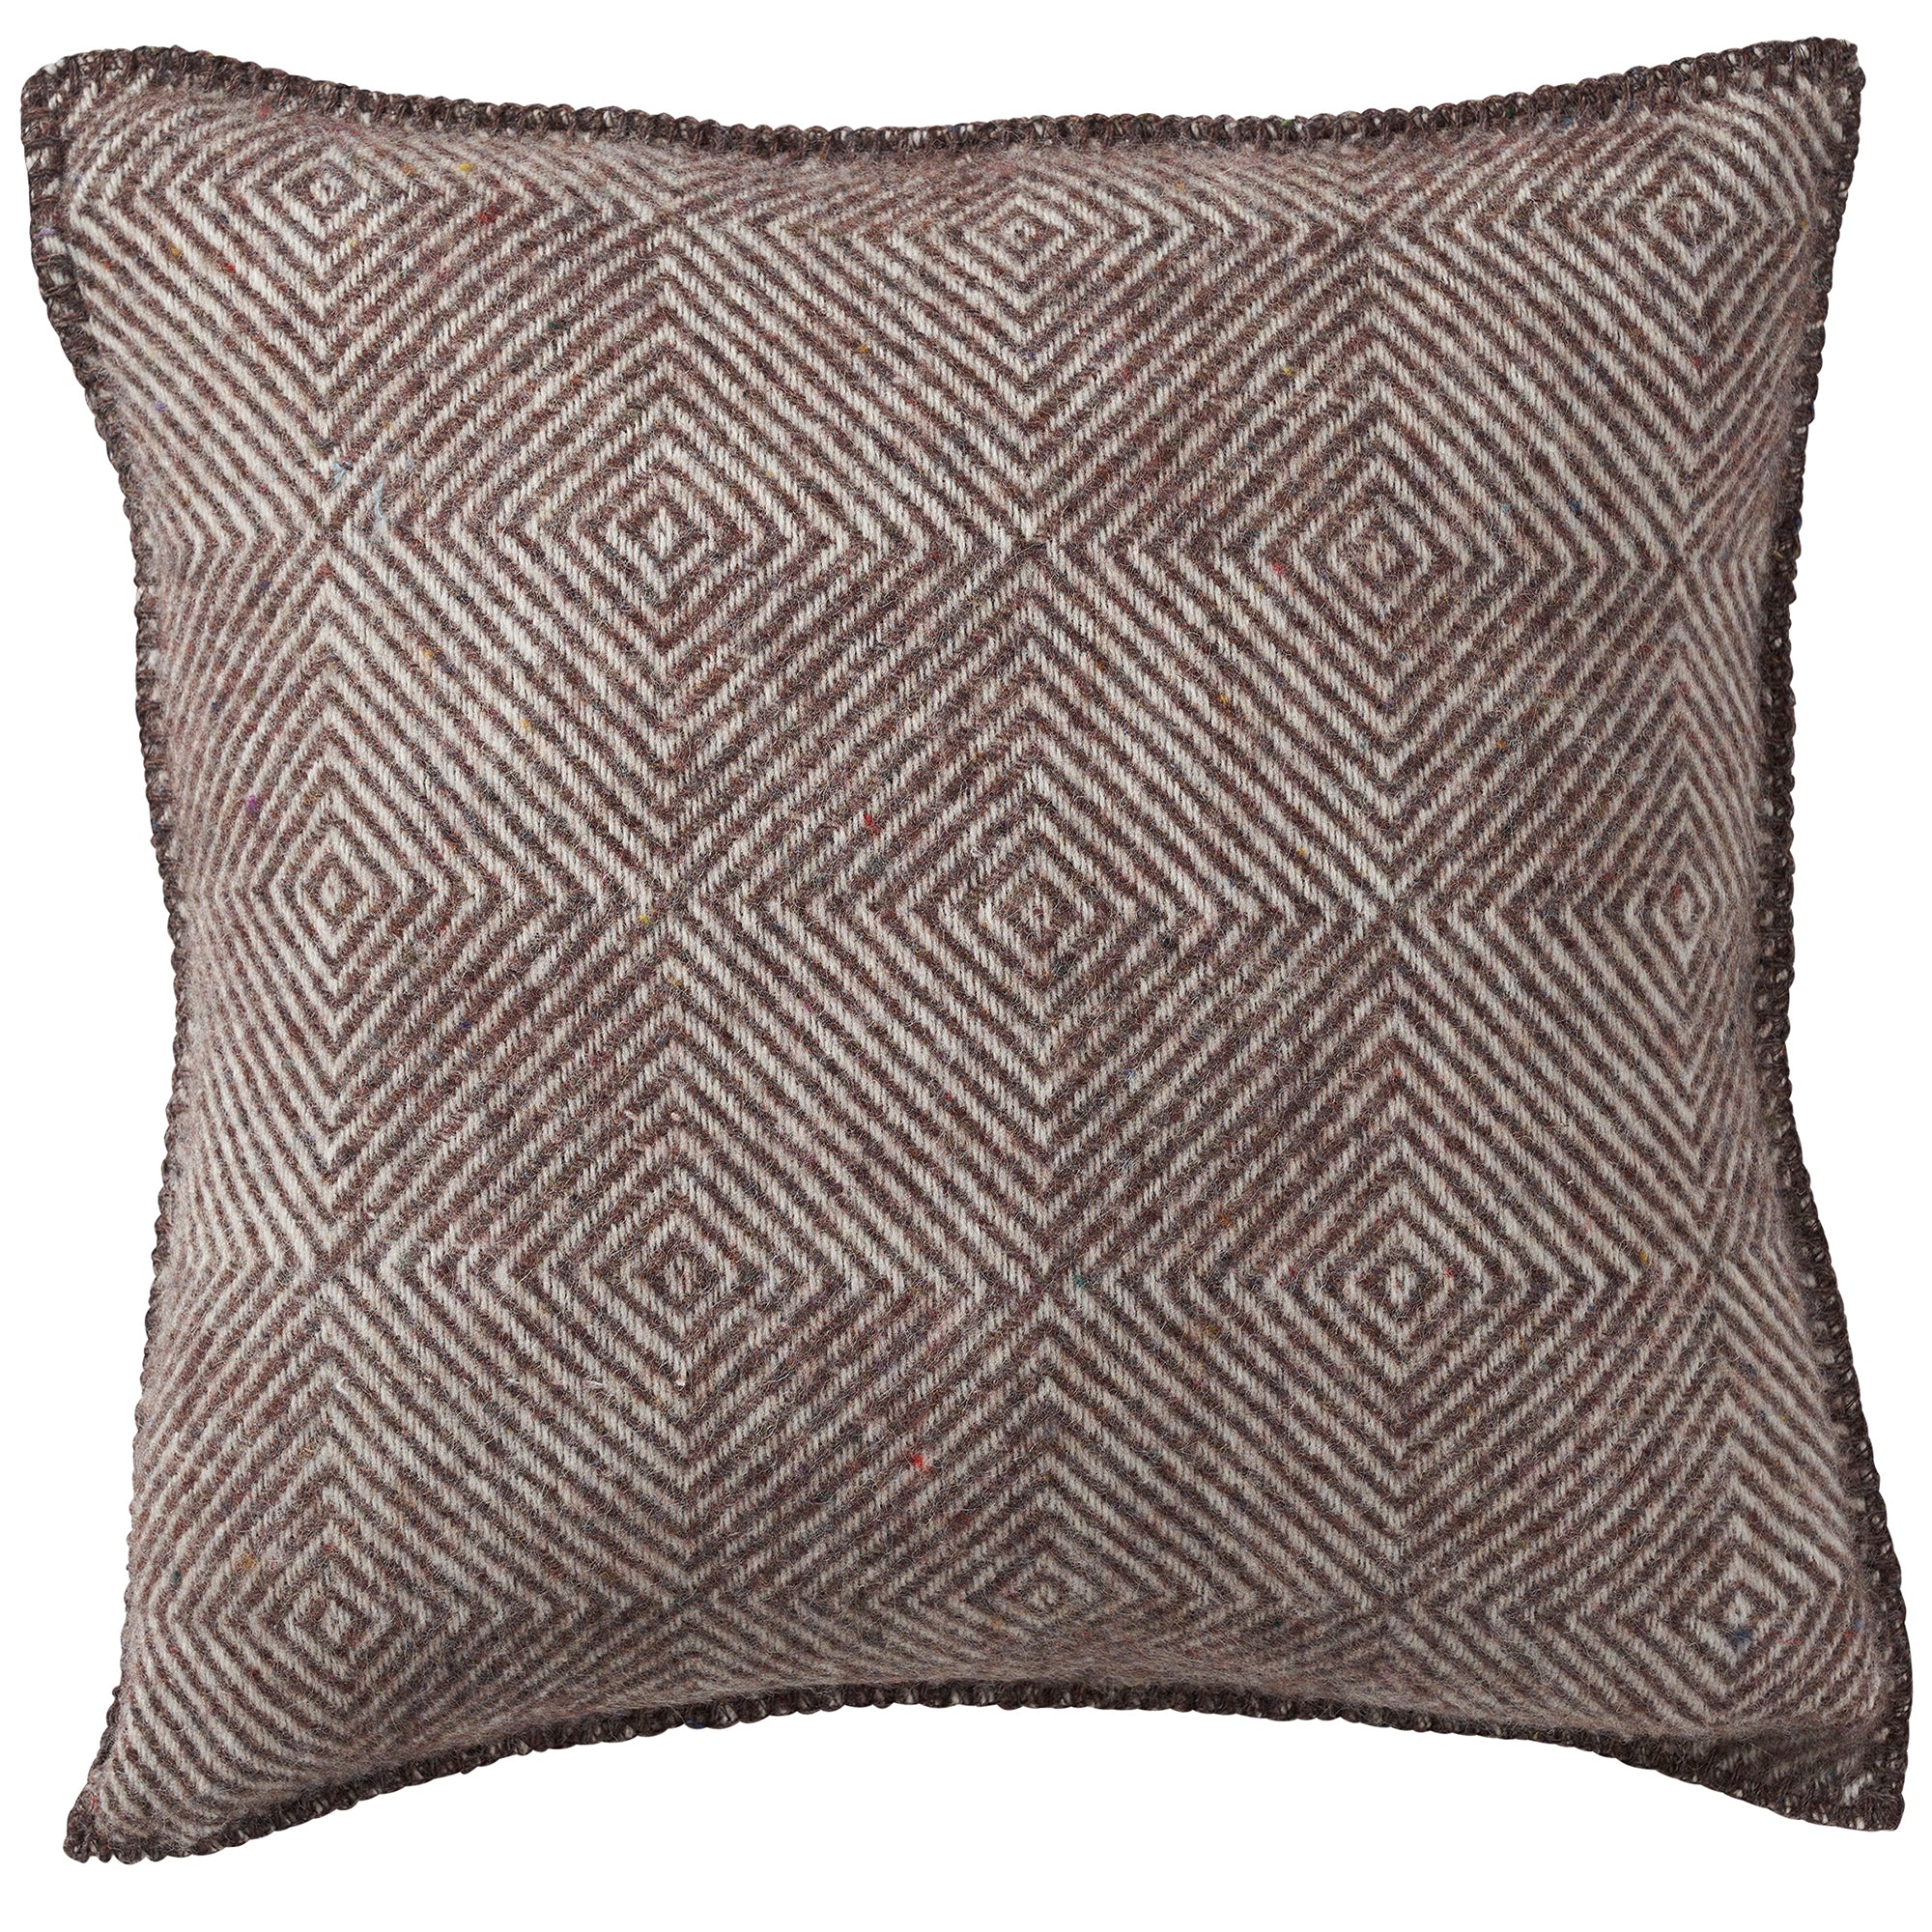 Gooseye Brown 45x45cm Recycled Wool Cushion Cover